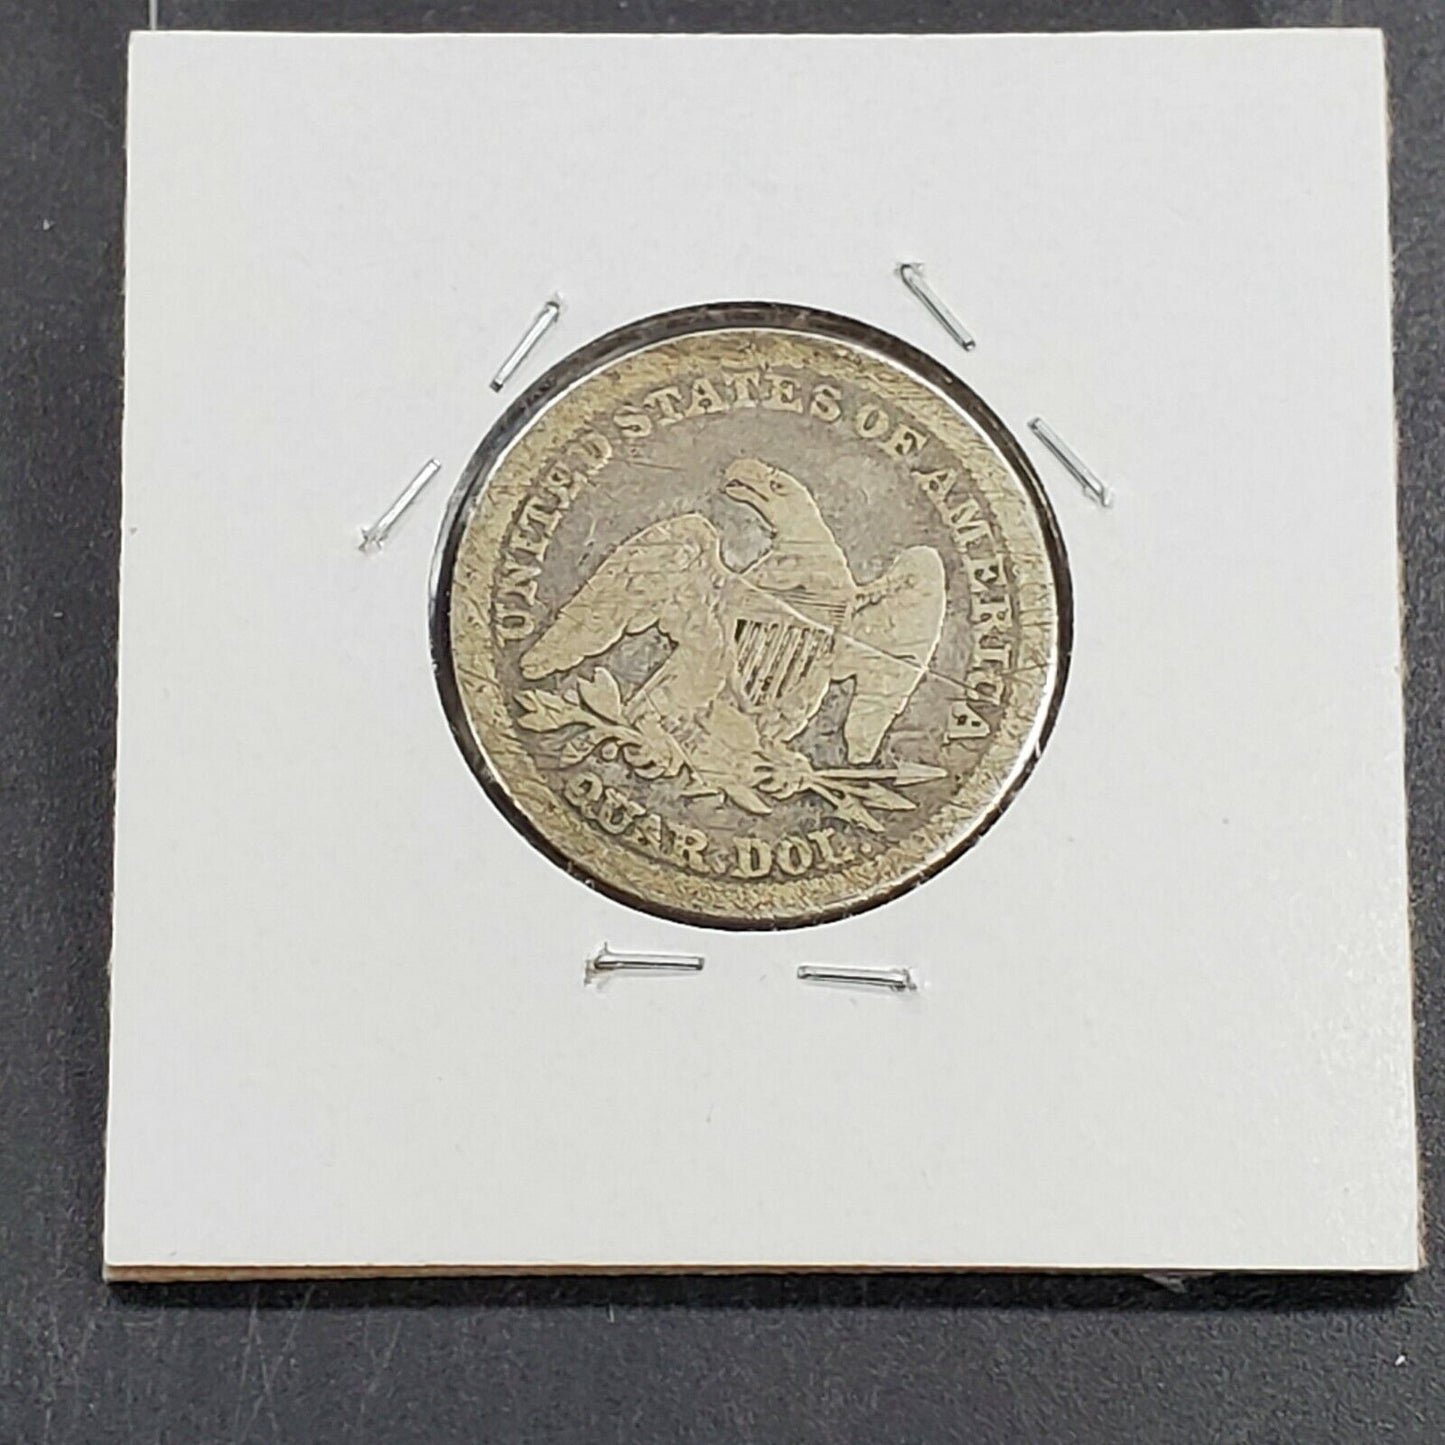 1858 P Seated Liberty Silver Quarter Coin Very Circulated Condition